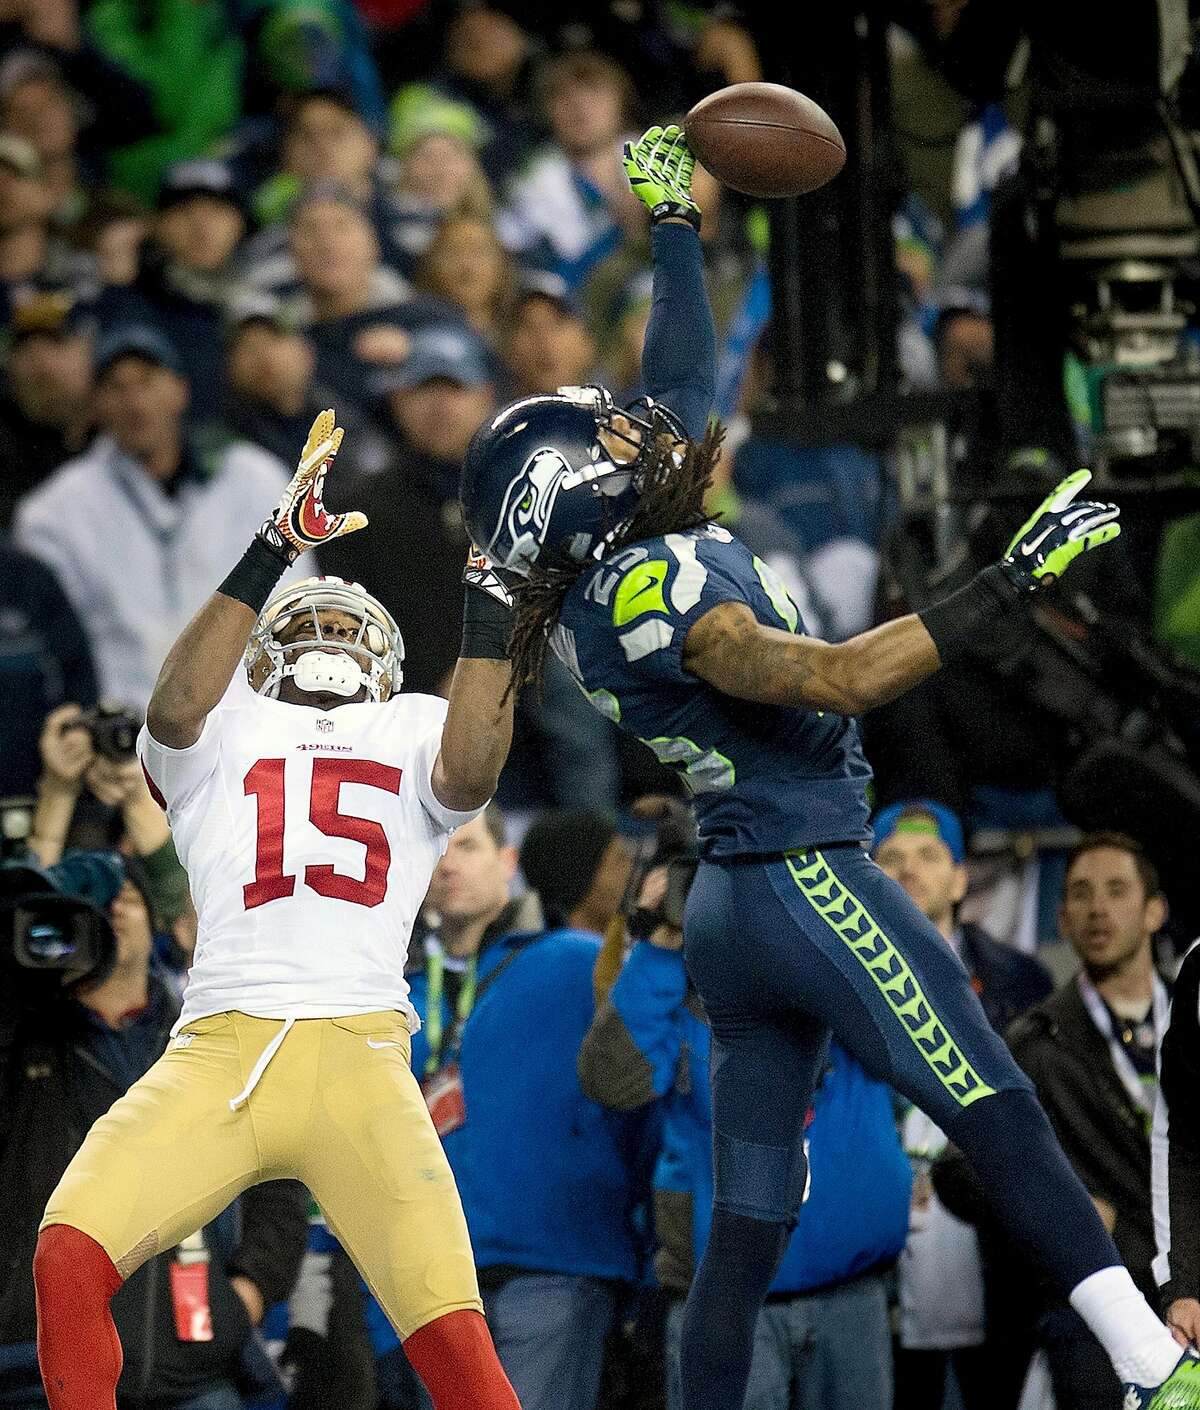 CORRECTS BYLINE TO PAUL KITAGAKI JR.-Seattle Seahawks cornerback Richard Sherman (25) hits the ball away from San Francisco 49ers wide receiver Michael Crabtree (15) and is intercepted by Seattle Seahawks outside linebacker Malcolm Smith (53) during the NFL football NFC Championship game, Sunday, Jan. 19, 2014, in Seattle. The Seahawks won 23-17 to advance to the Super Bowl. (AP Photo/The Sacramento Bee, Paul Kitagaki Jr.) MAGS OUT; TV OUT (KCRA3, KXTV10, KOVR13, KUVS19, KMAZ31, KTXL40) MANDATORY CREDIT